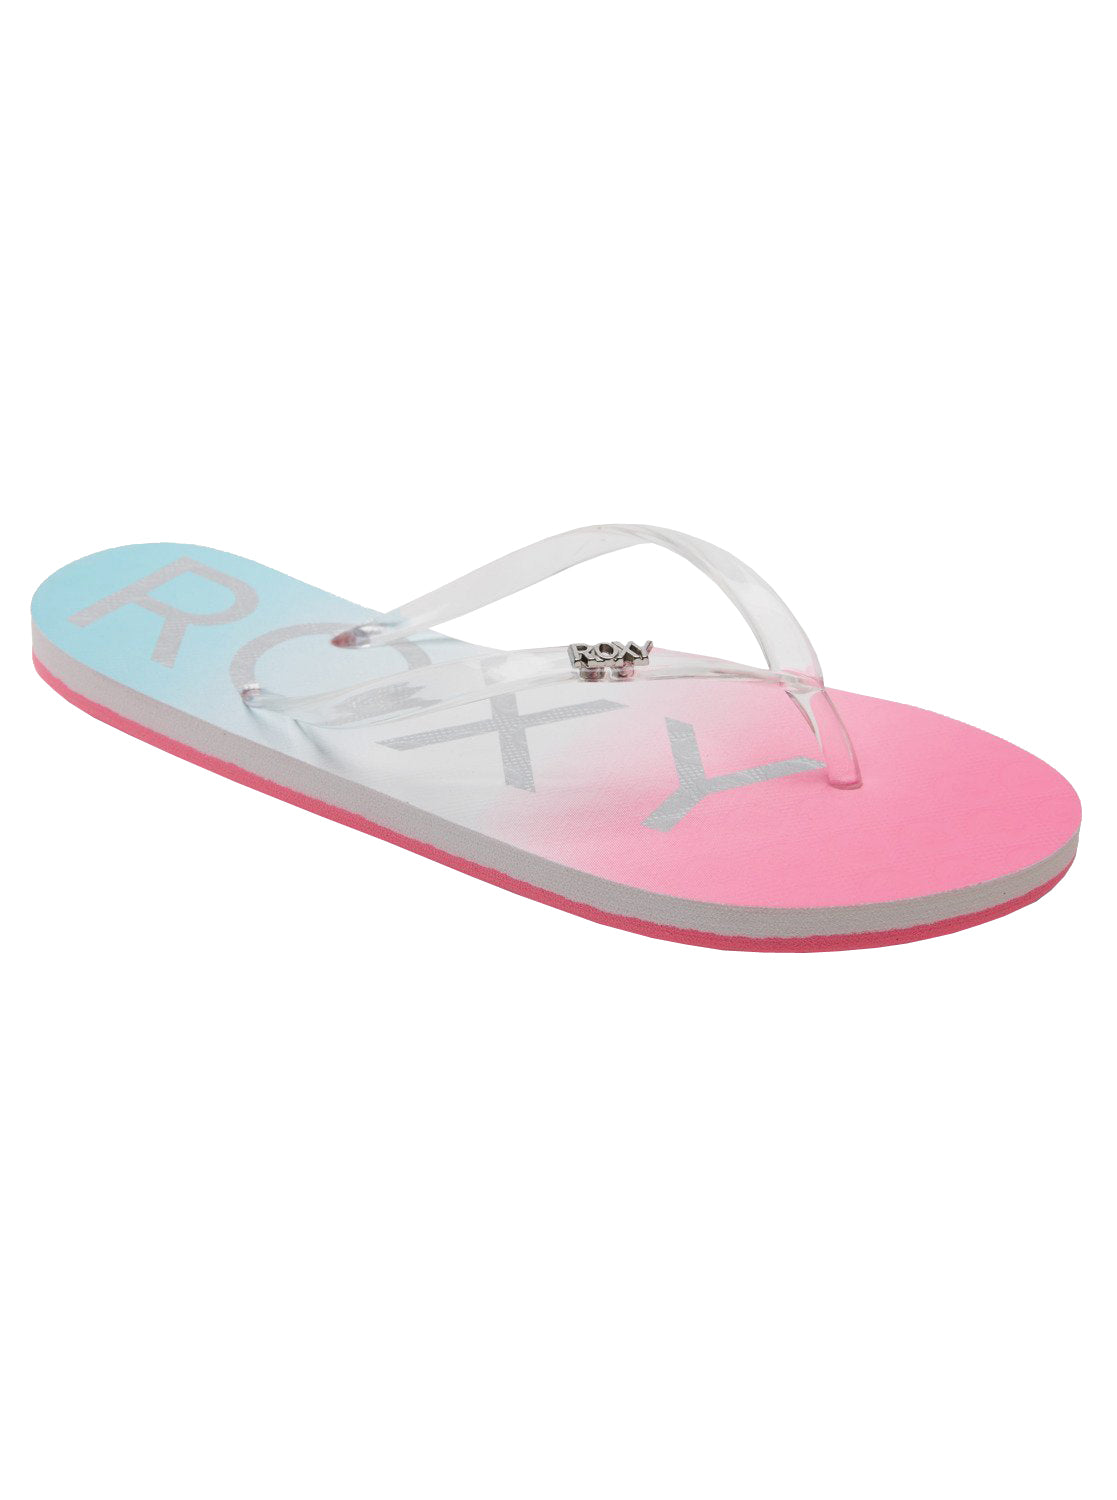 Roxy Viva Jelly Womens Sandal WCQ-White-Crazy Pink-Turquoise 9